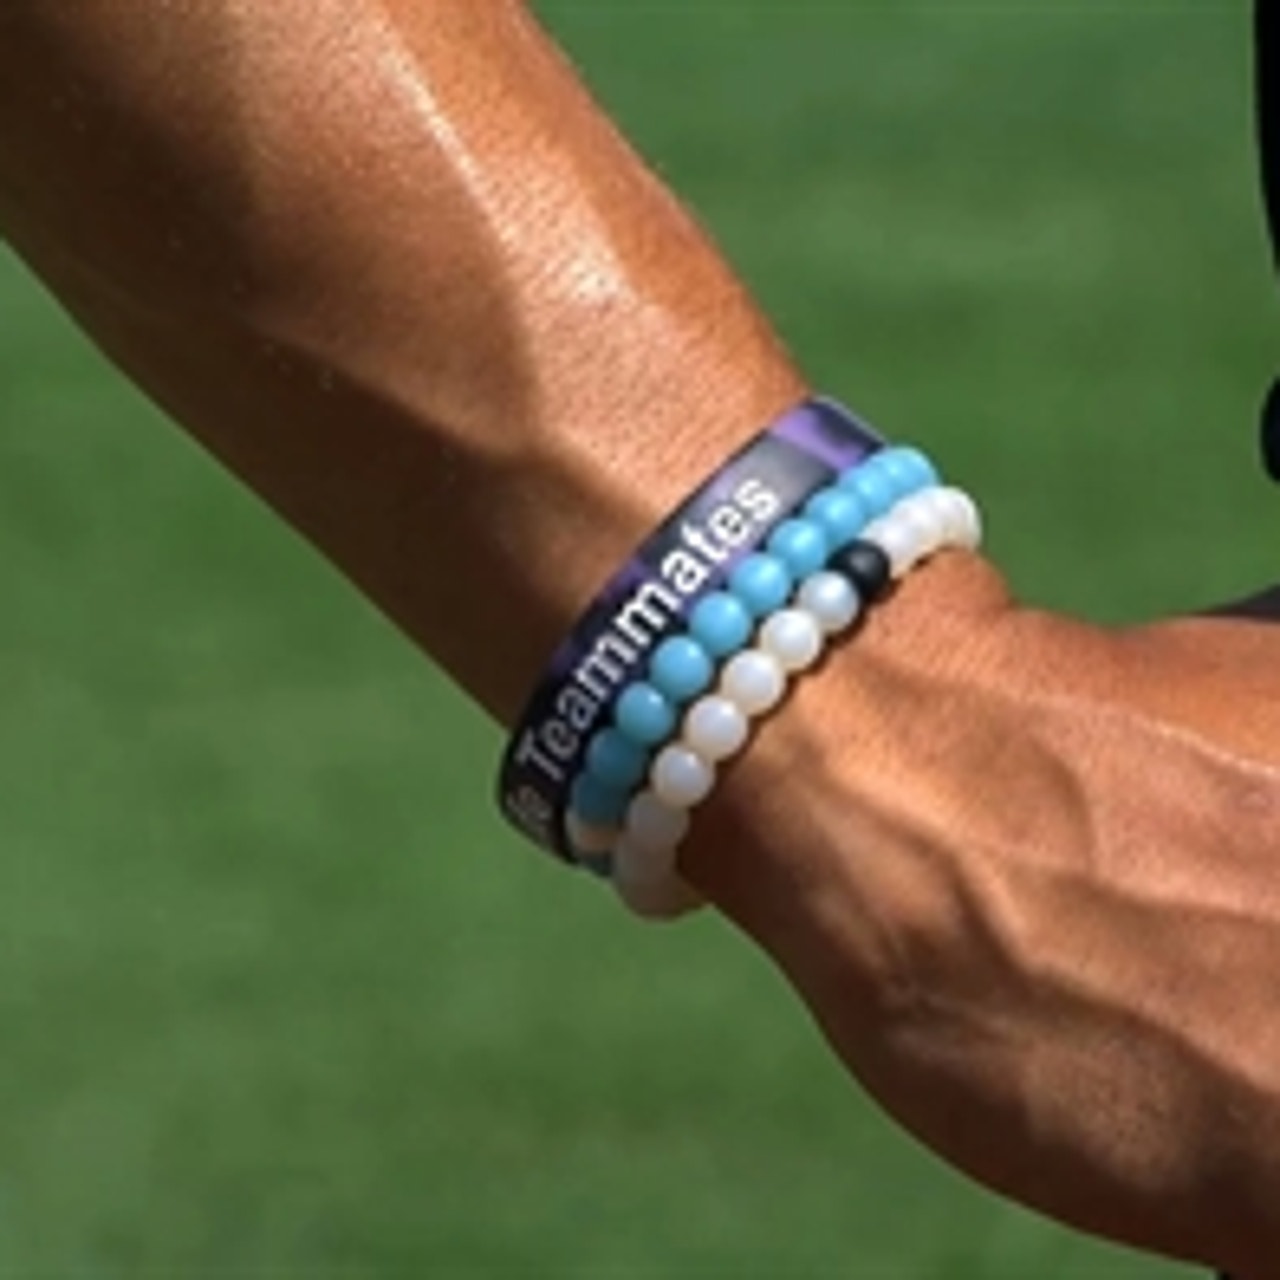 Betts supports Will To Live Foundation with wristbands